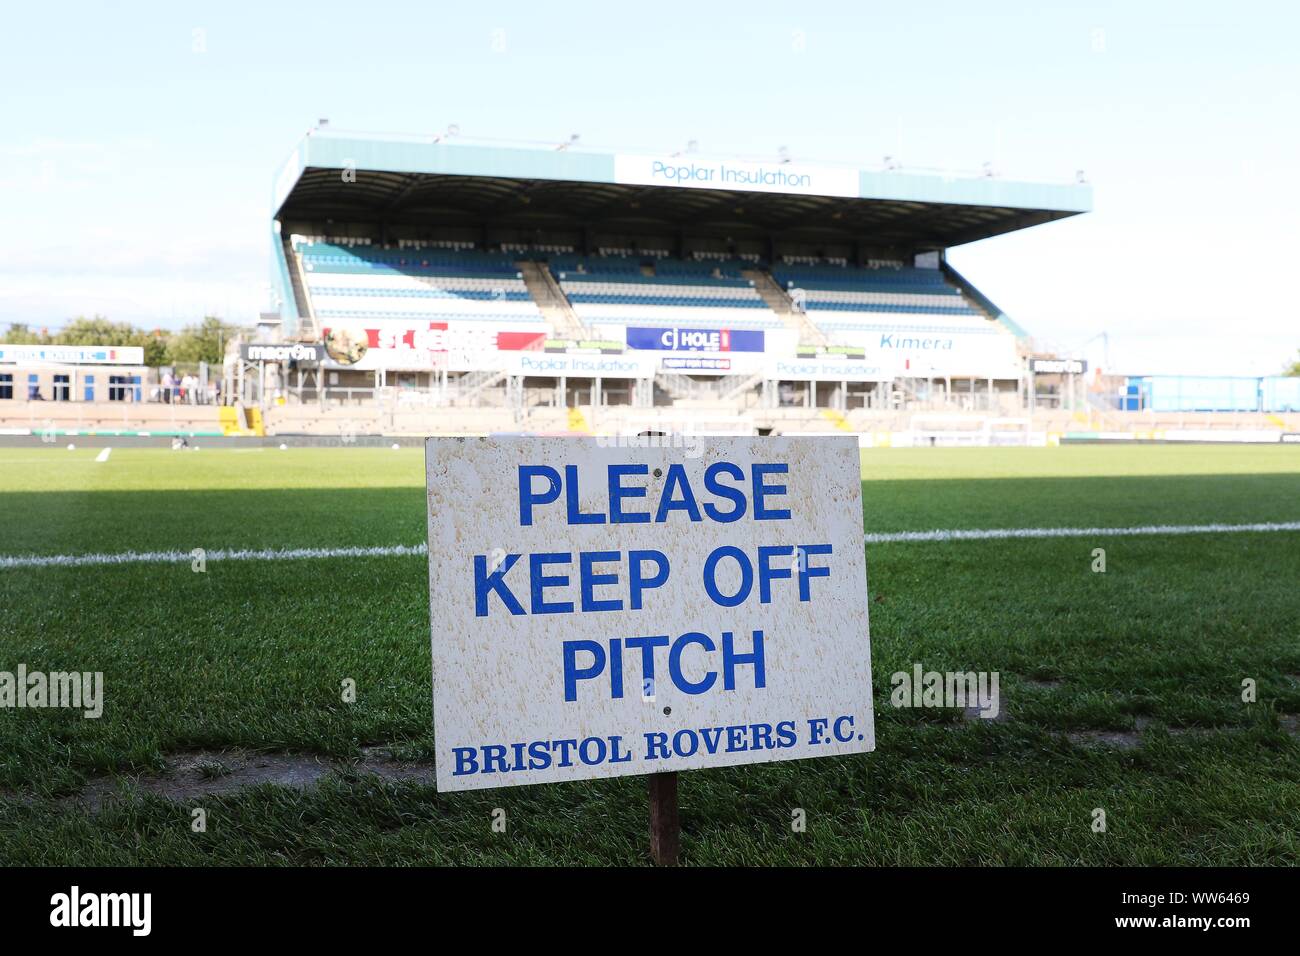 Bristol Rovers FC v Cheltenham Town FC  at  (EFL Carabao Cup 1st Round - 13 August 2019) - The Mem  Picture by Antony Thompson - Thousand Word Media, Stock Photo